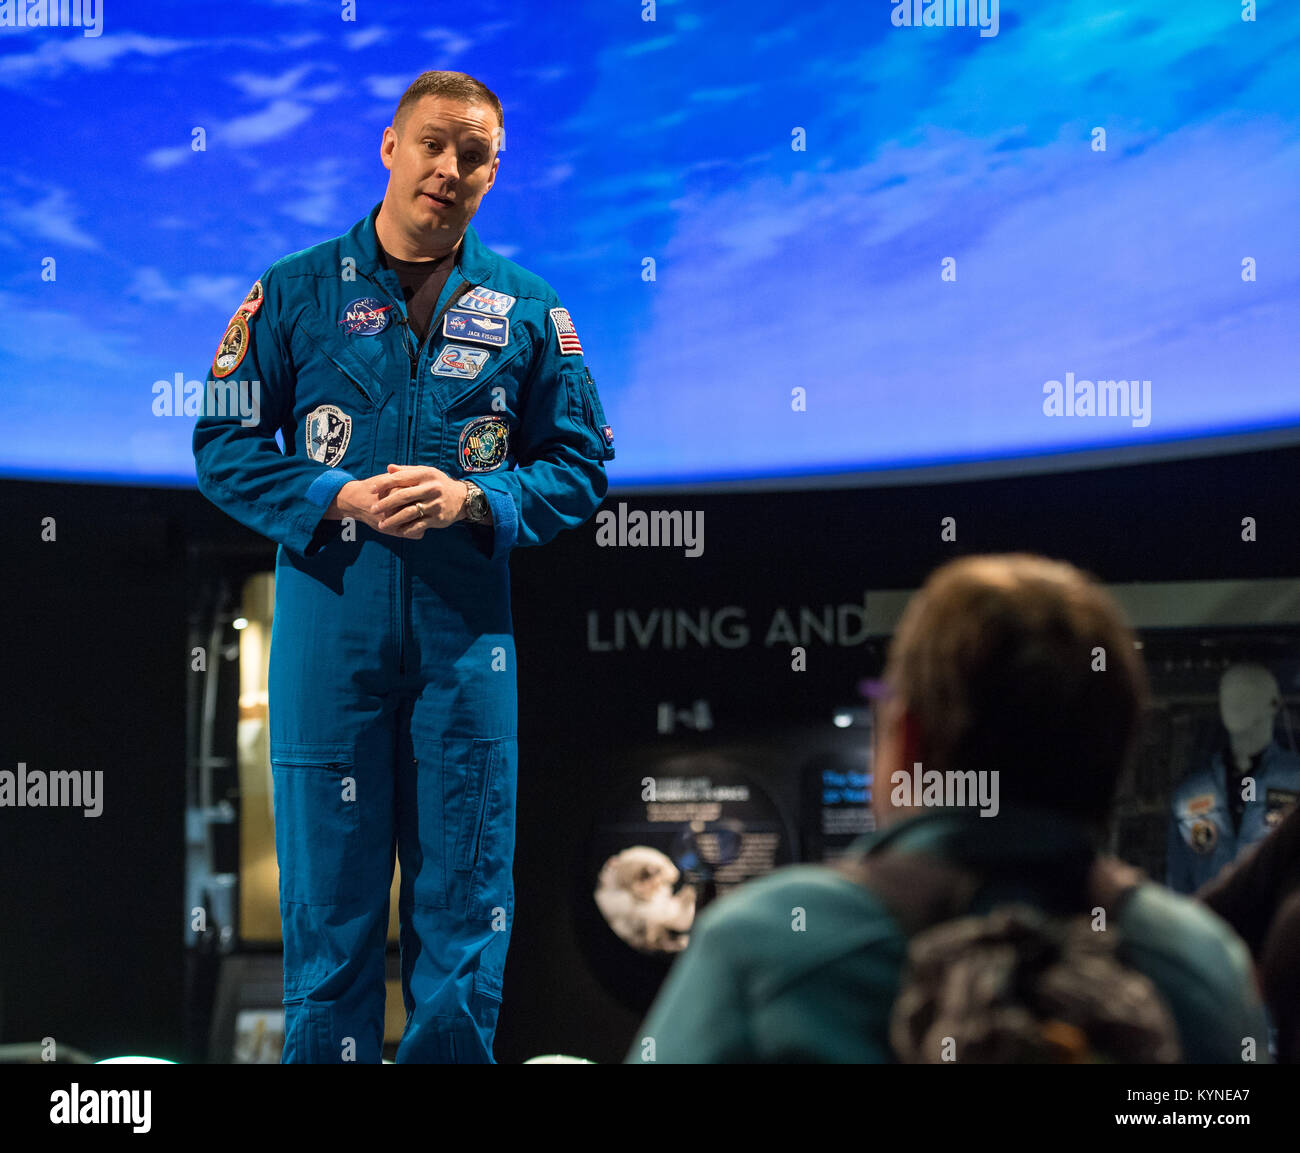 An audience member asks a question after a presentation by NASA astronaut Jack Fischer about his time onboard the International Space Station (ISS) during Expeditions 51/52, Friday, Nov. 3, 2017 at Smithsonian's National Air and Space Museum in Washington. During Expedition 52, Fischer completed hundreds of scientific experiments and two spacewalks, and concluded his 136-day mission when he landed in a remote area near the town of Zhezkazgan, Kazakhstan in September 2017. Photo Credit: (NASA/Aubrey Gemignani) Stock Photo